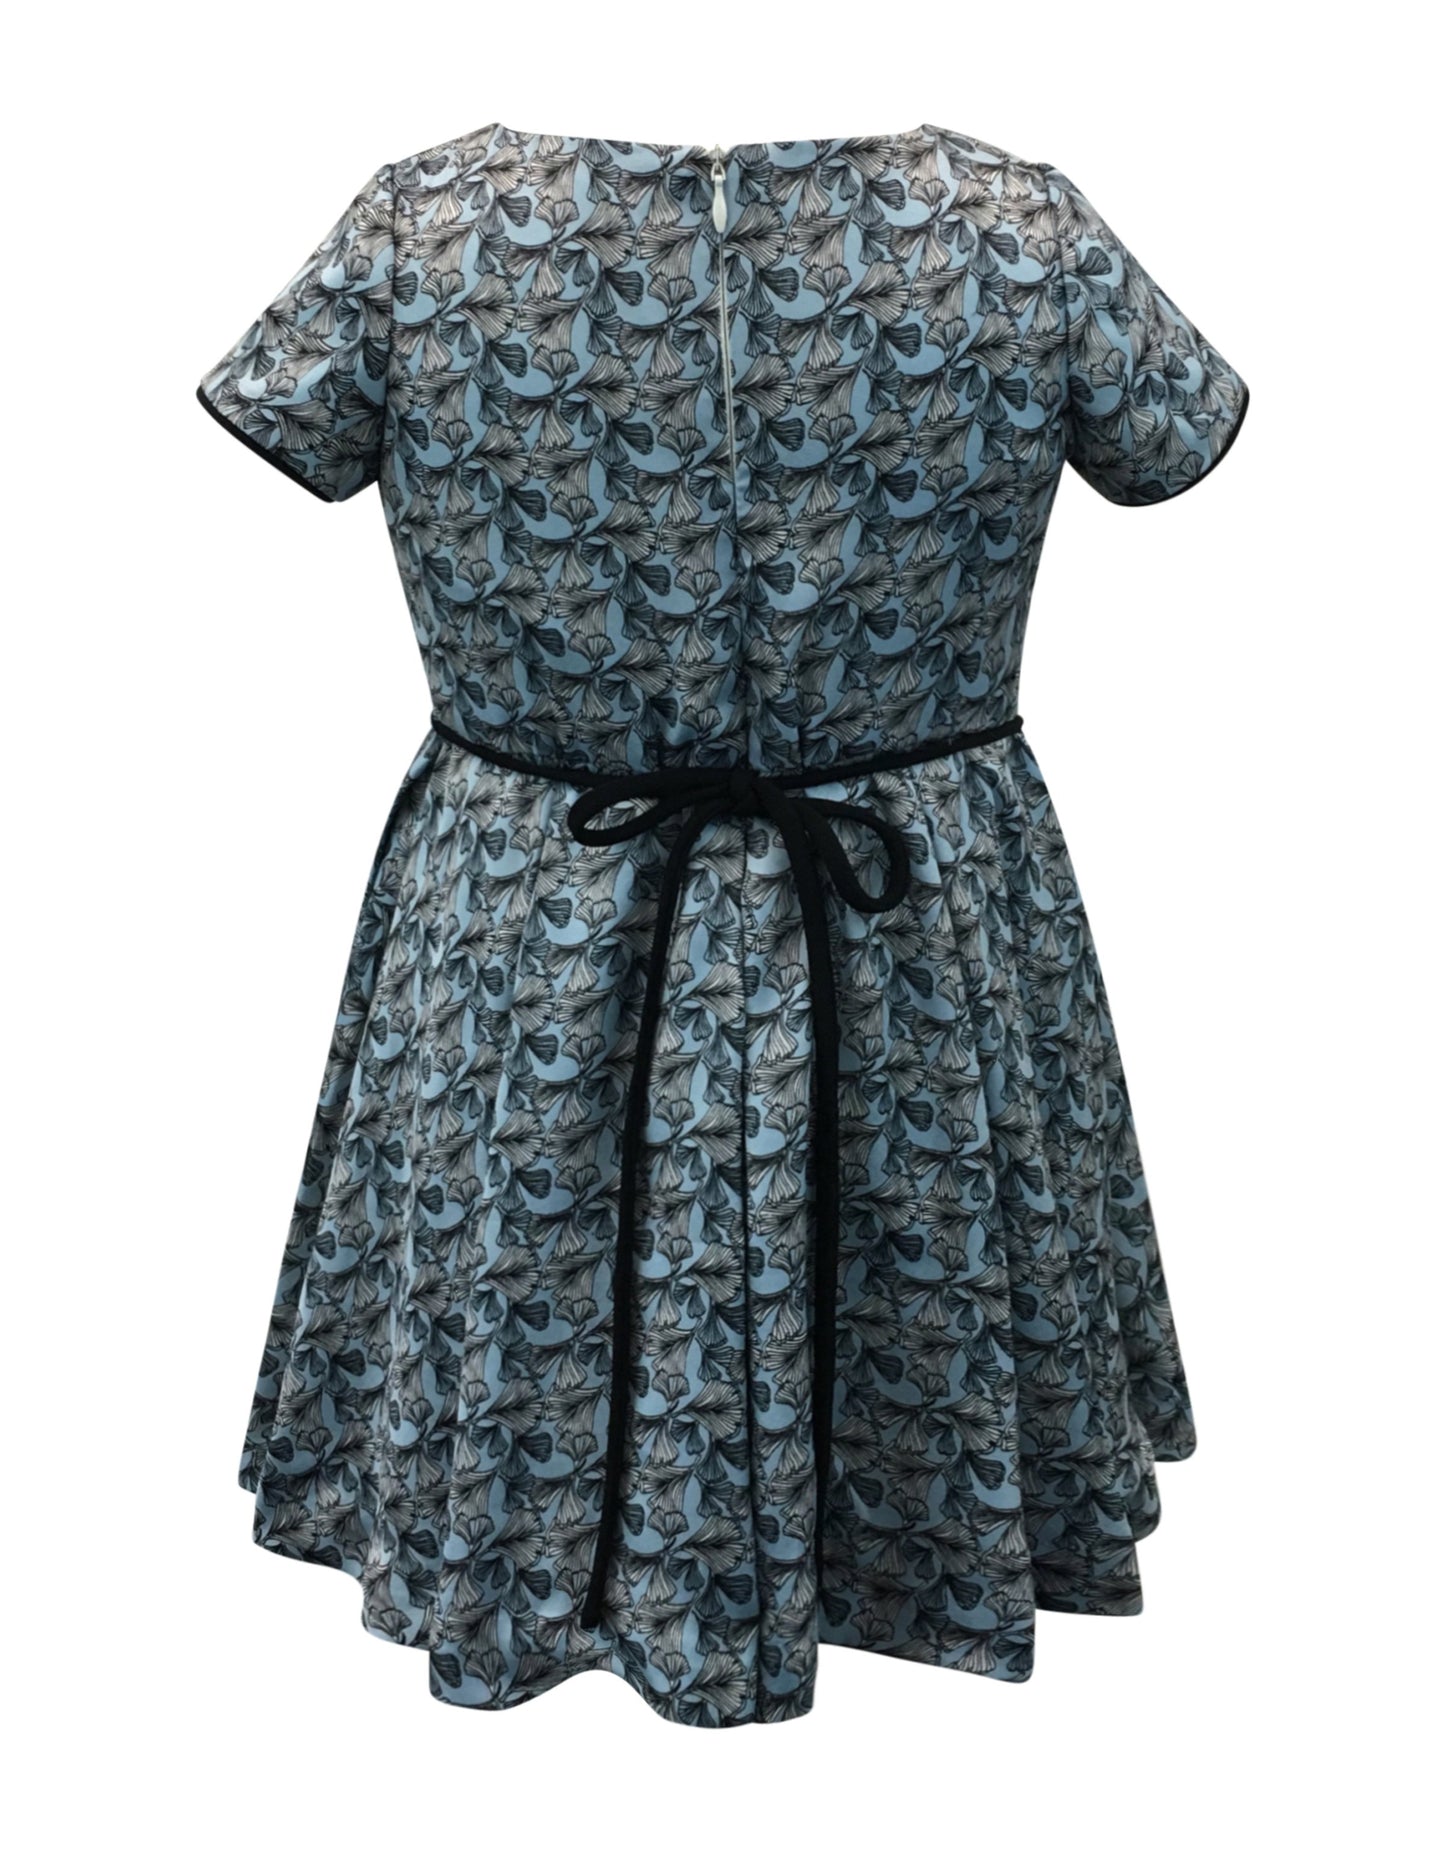 Helena and Harry Girl's Blue and Black Printed Dress